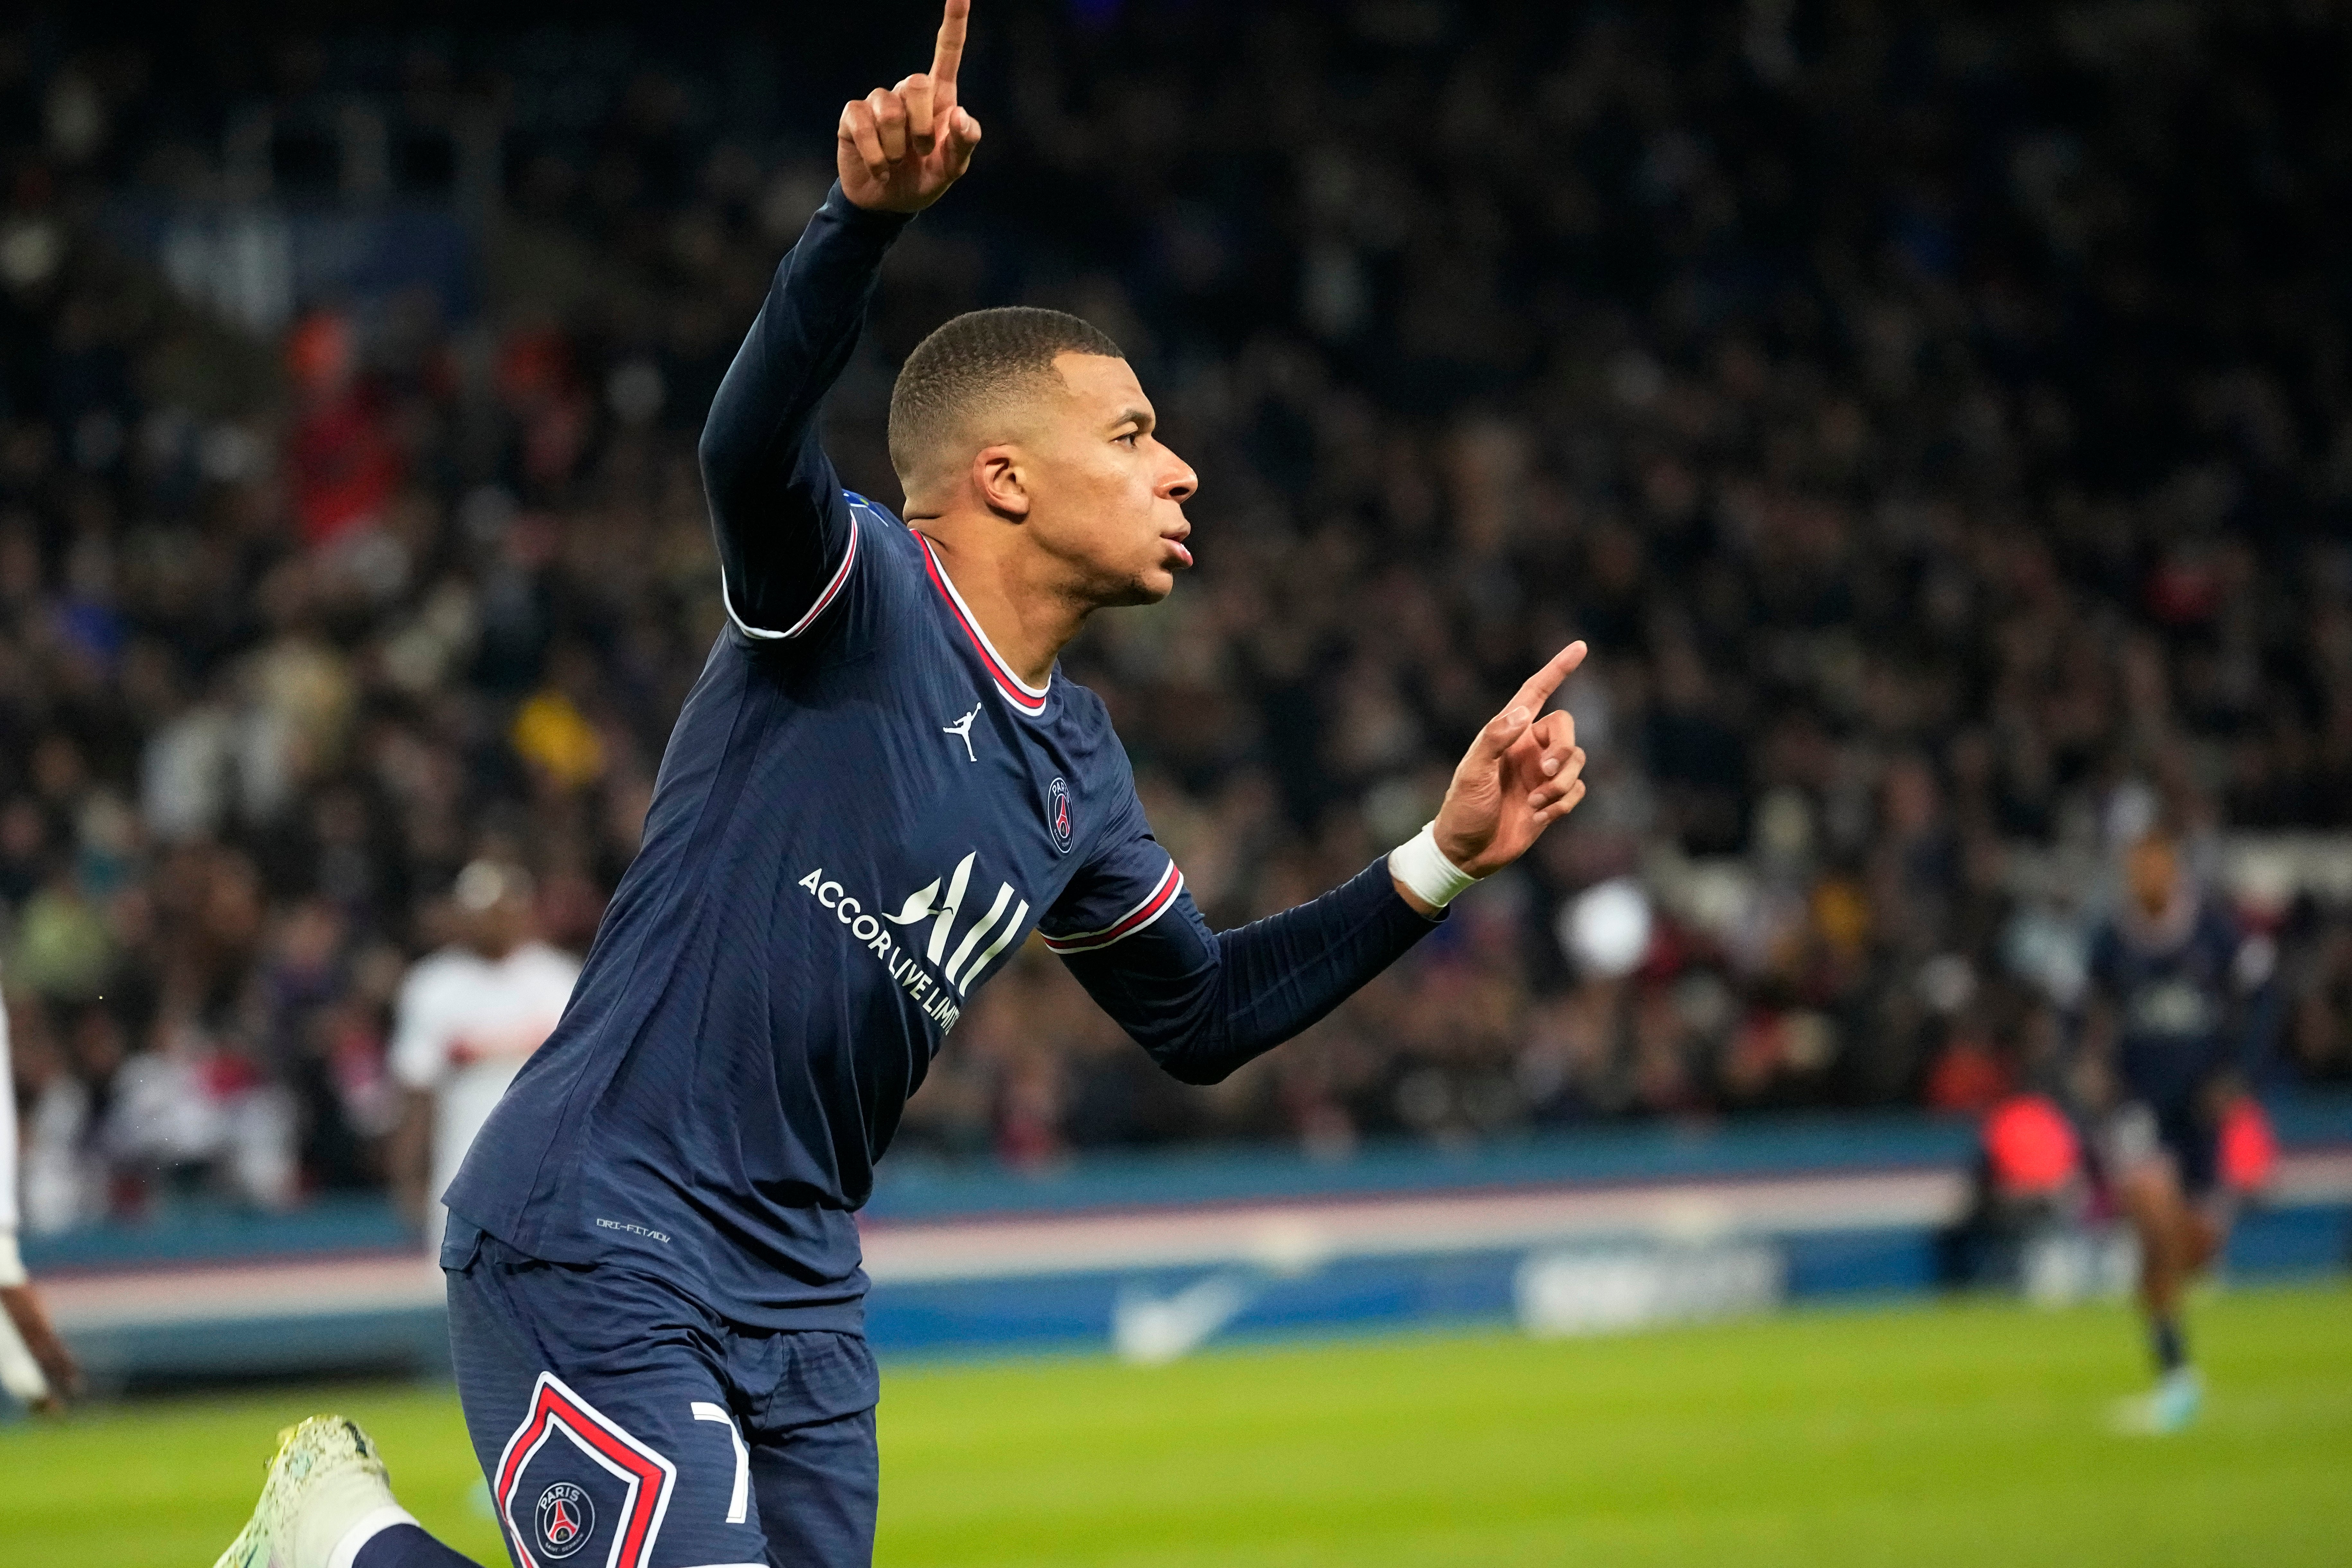 Kylian Mbappe has been linked with Real Madrid